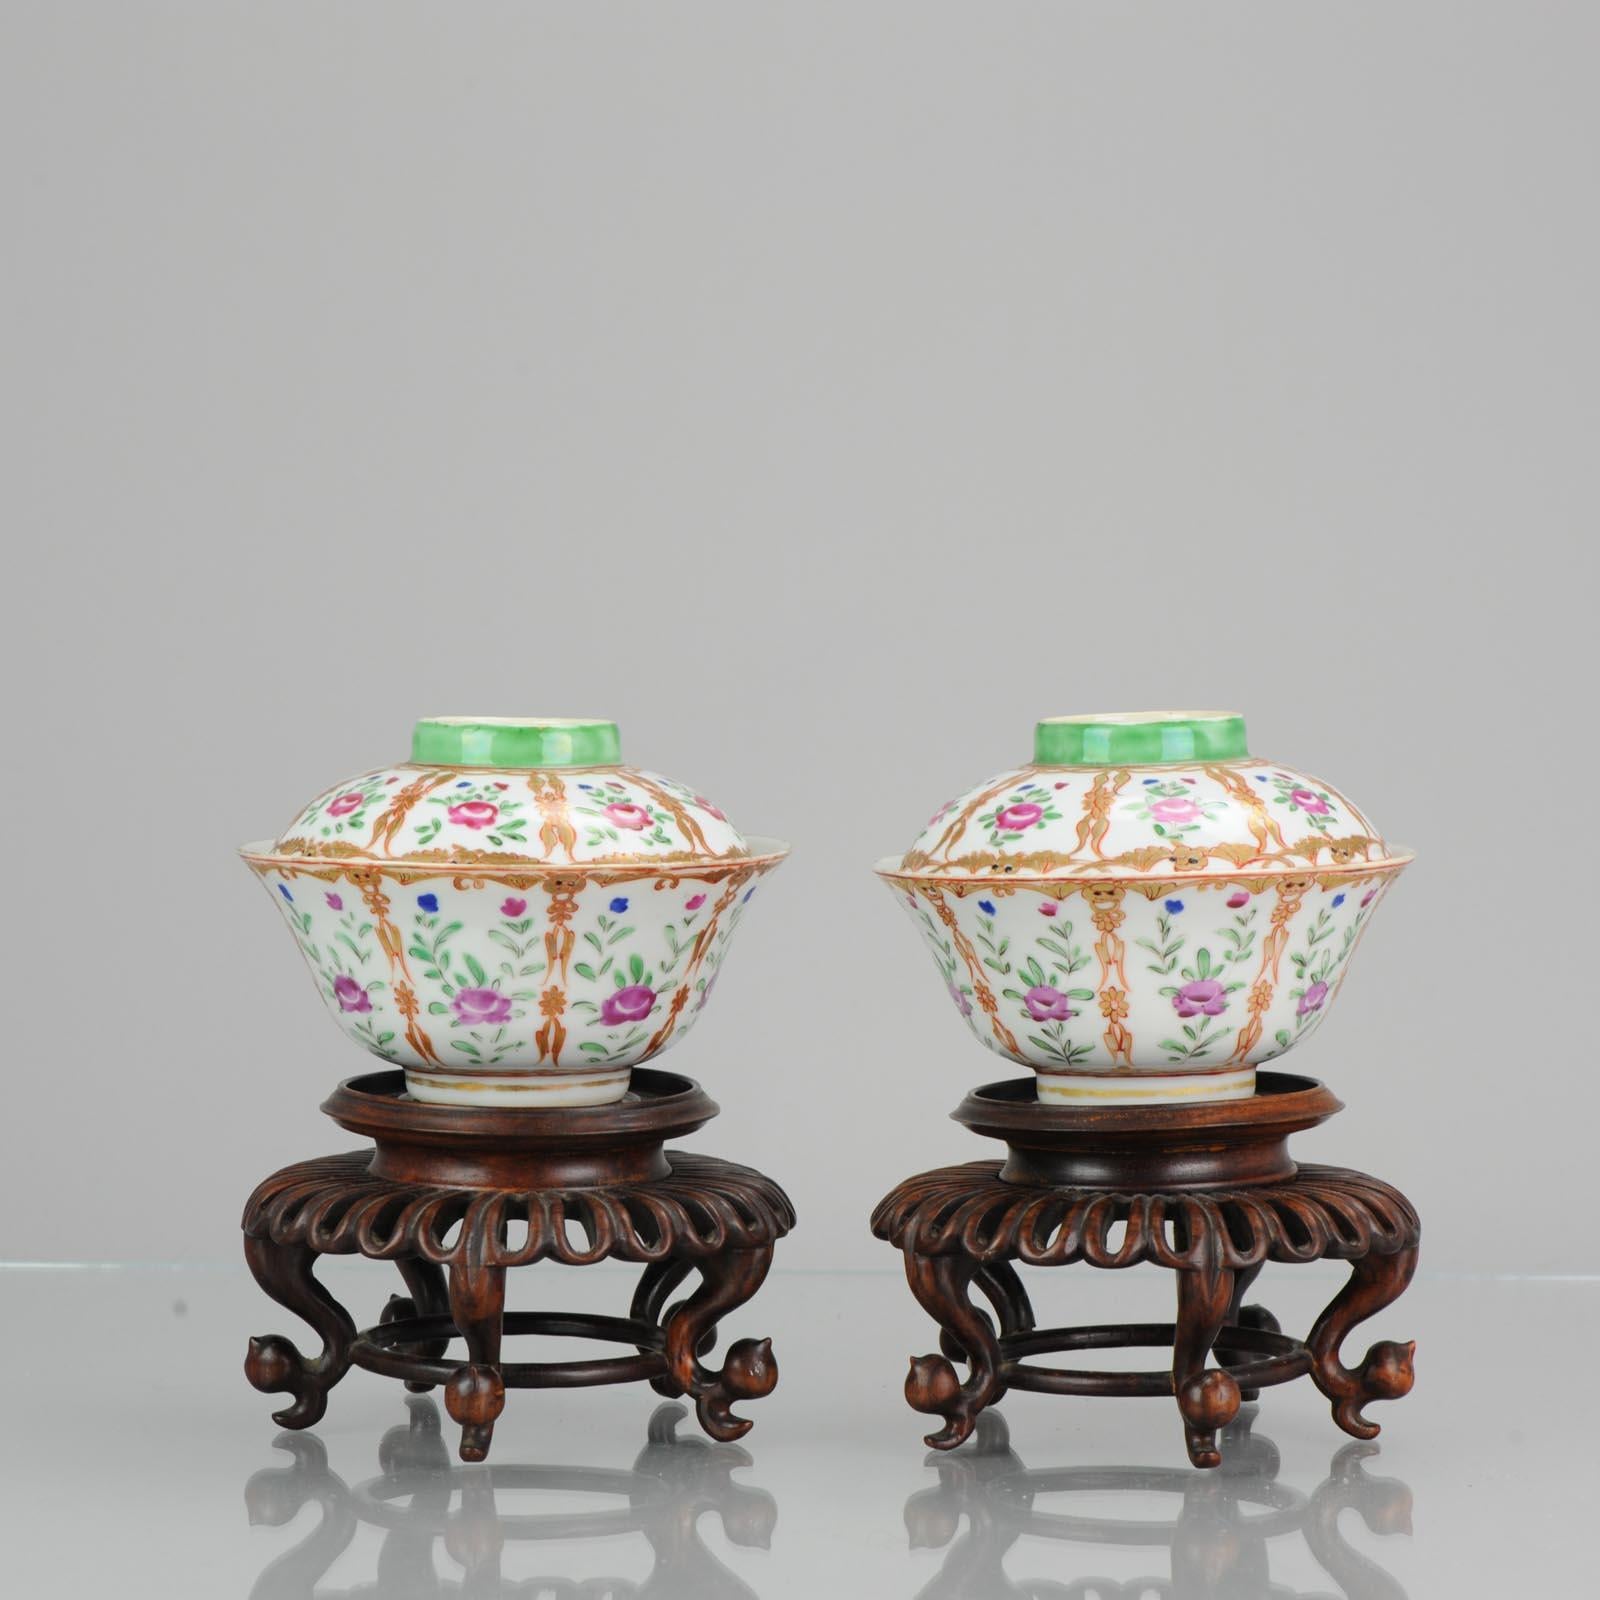 18th Century and Earlier Antique Chinese Porcelain Lidded Bowls SE Asia Market Bencharong Thai Market